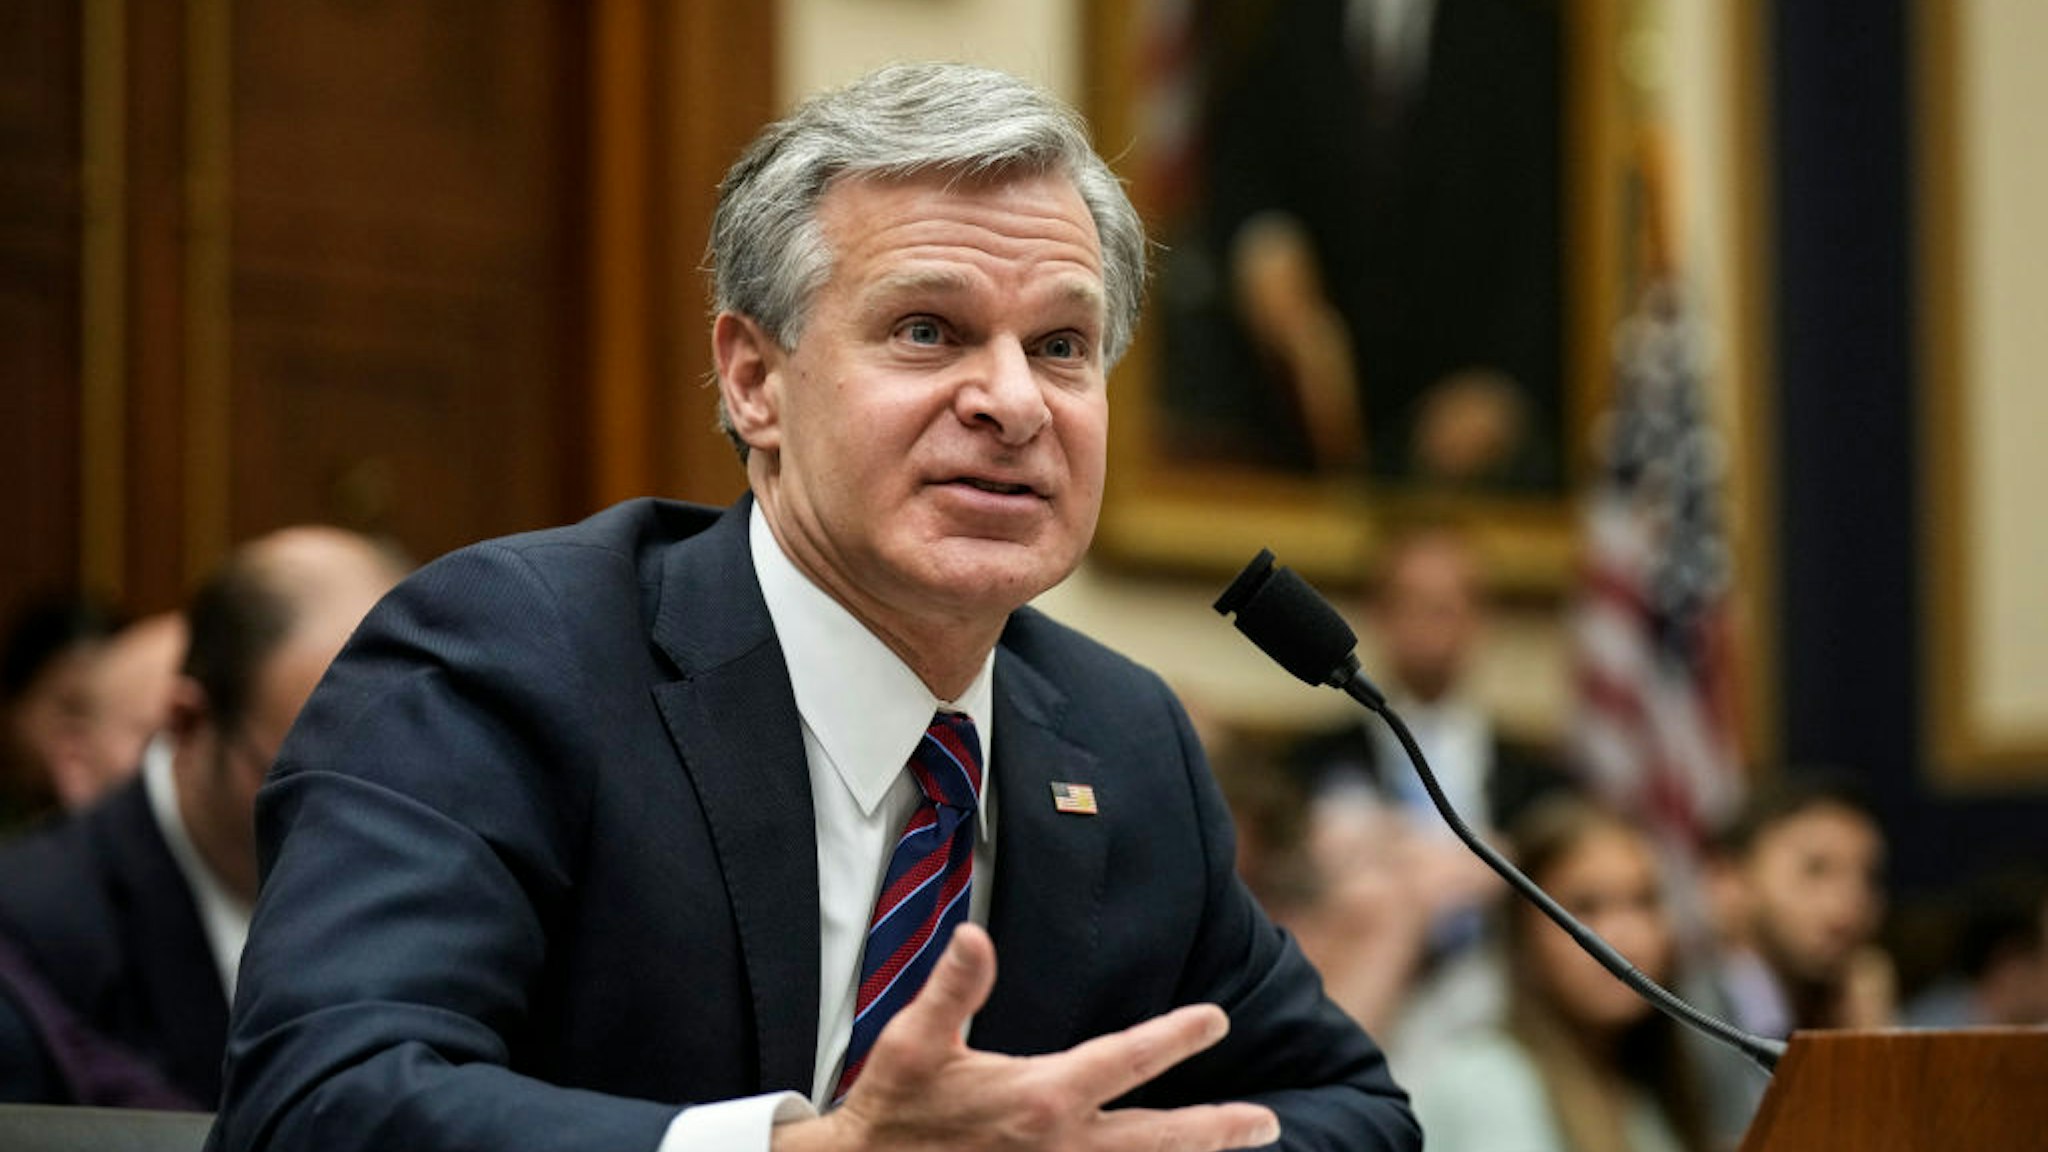 WASHINGTON, DC - JULY 12: FBI Director Christopher Wray testifies during a House Judiciary Committee hearing about oversight of the Federal Bureau of Investigation on Capitol Hill July 12, 2023 in Washington, DC. Conservative House Republicans claim that the FBI and other federal law enforcement agencies have been "weaponized" against conservatives, including former U.S. President Donald Trump and his allies. Wray defended the FBI workforce, emphasizing that the agency protects Americans every day "from a staggering array of threats." (Photo by Drew Angerer/Getty Images)